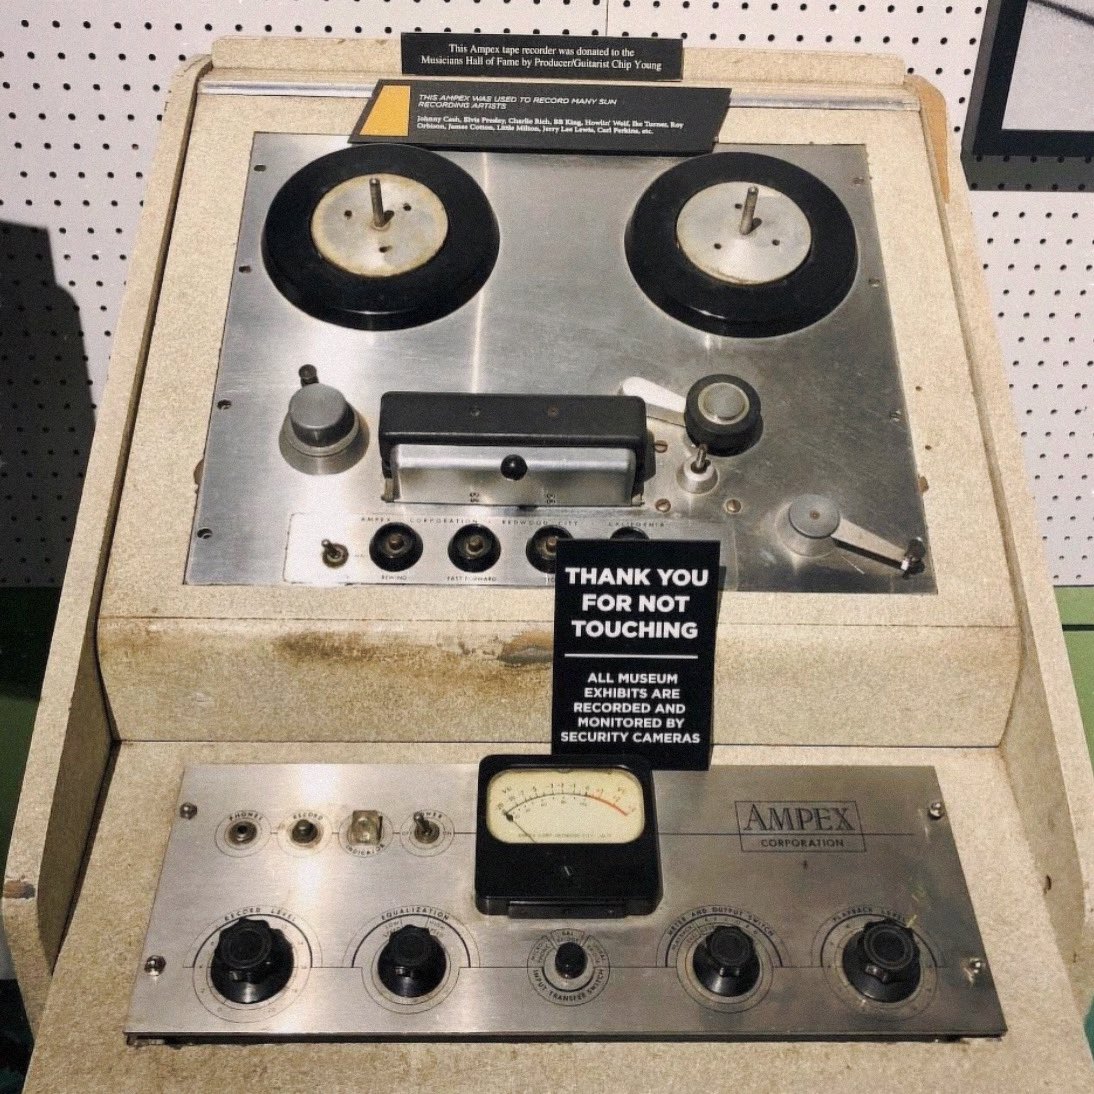 Producer and guitarist Chip Young donated This Ampex tape recorder to the Musicians Hall of Fame & Museum. This Ampex was used to record Sun Records artists including Elvis Presley, Johnny Cash, and BB King to name a few. Come See What You’ve Heard! #musicianshalloffame